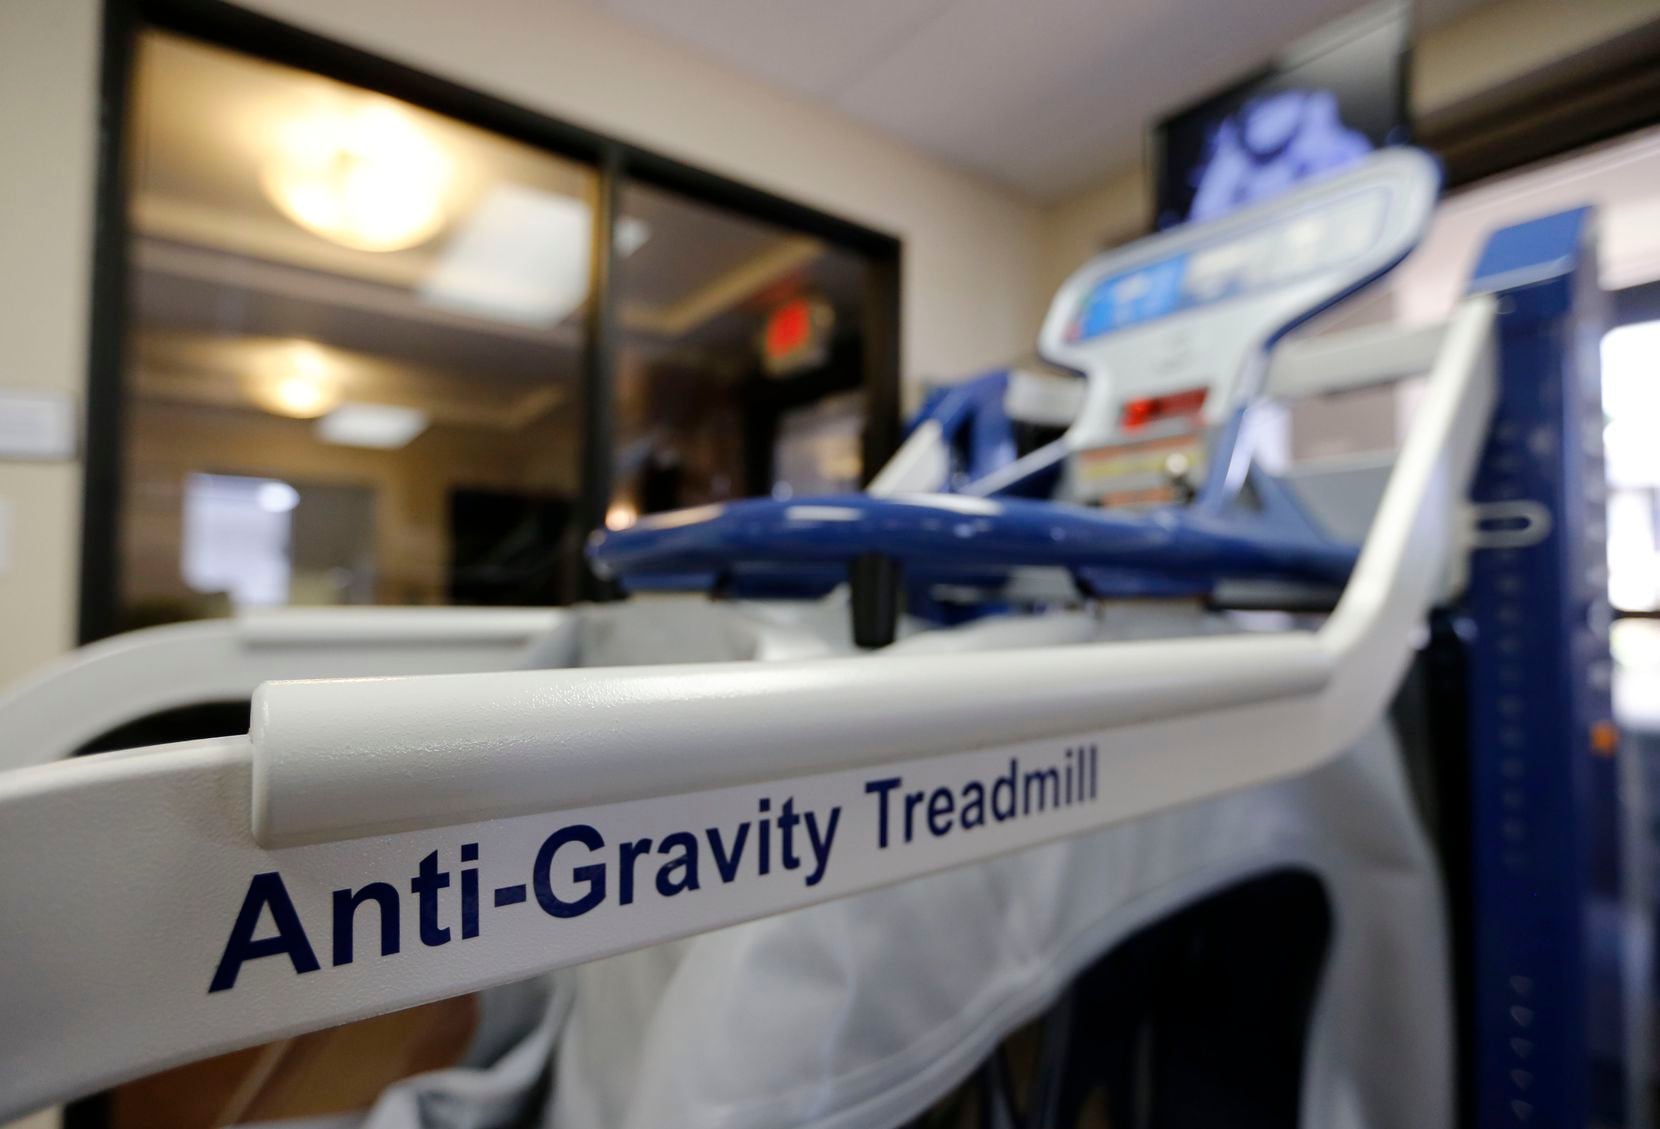 Alter G Anti-Gravity Treadmill at Baylor Institute for Rehabilitation in Dallas, on Friday,...